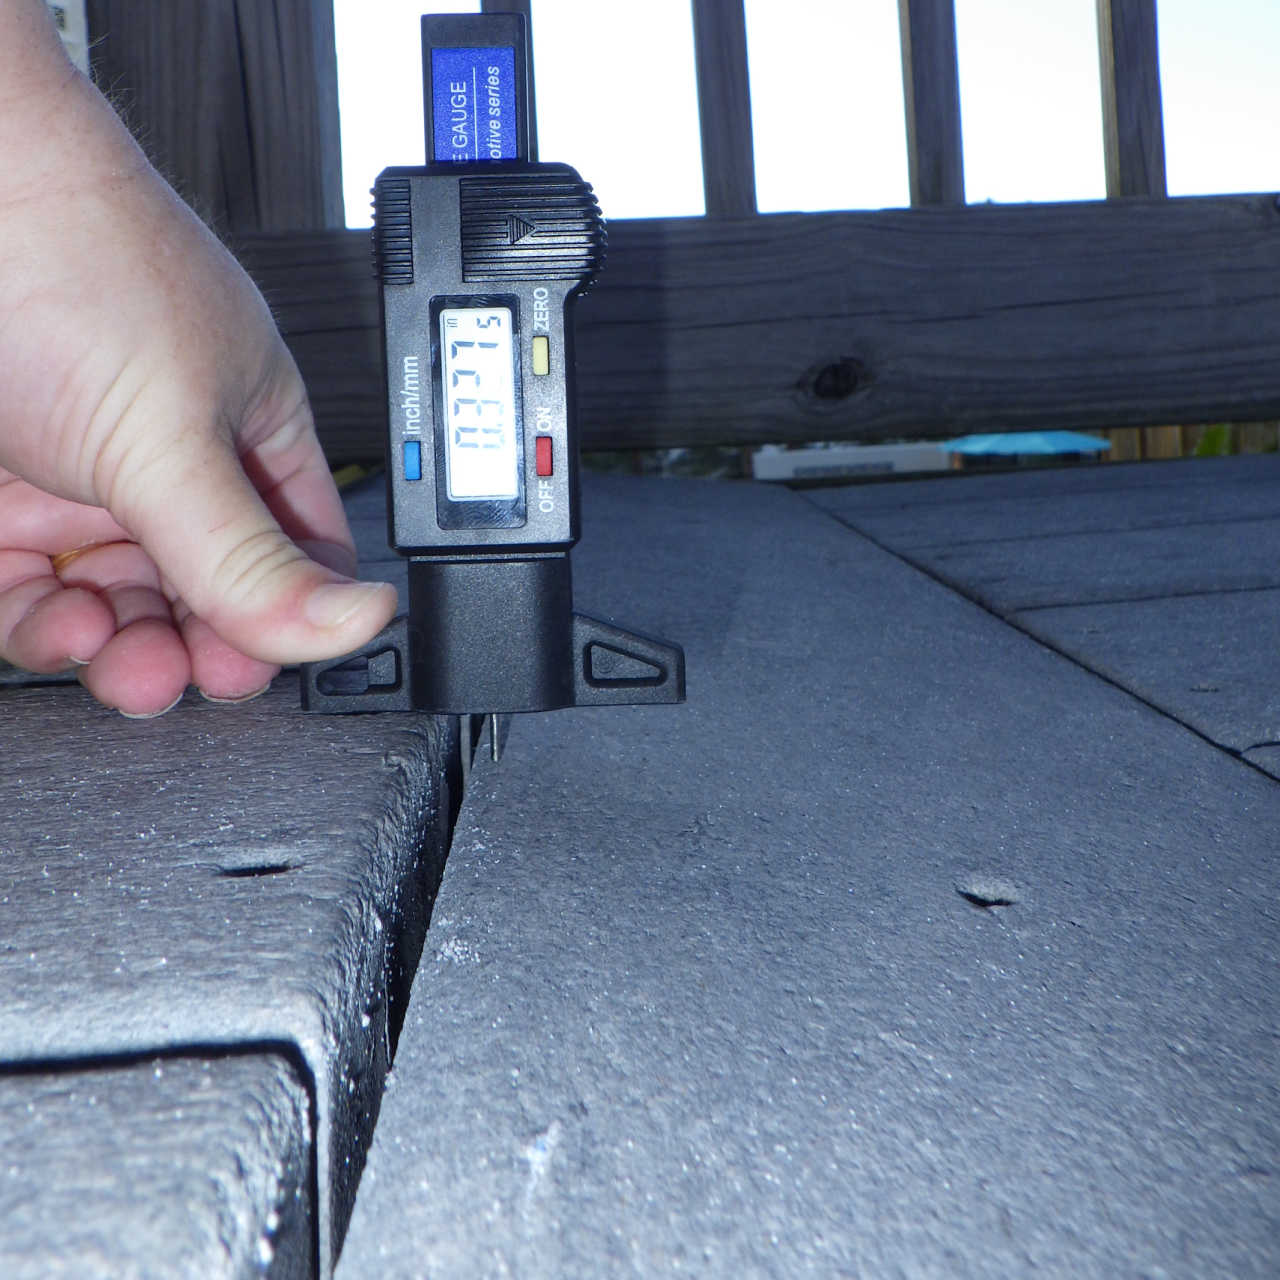 expert engineer photo of measurement using digital device showing change in elevation if .33 inches on a boardwalk